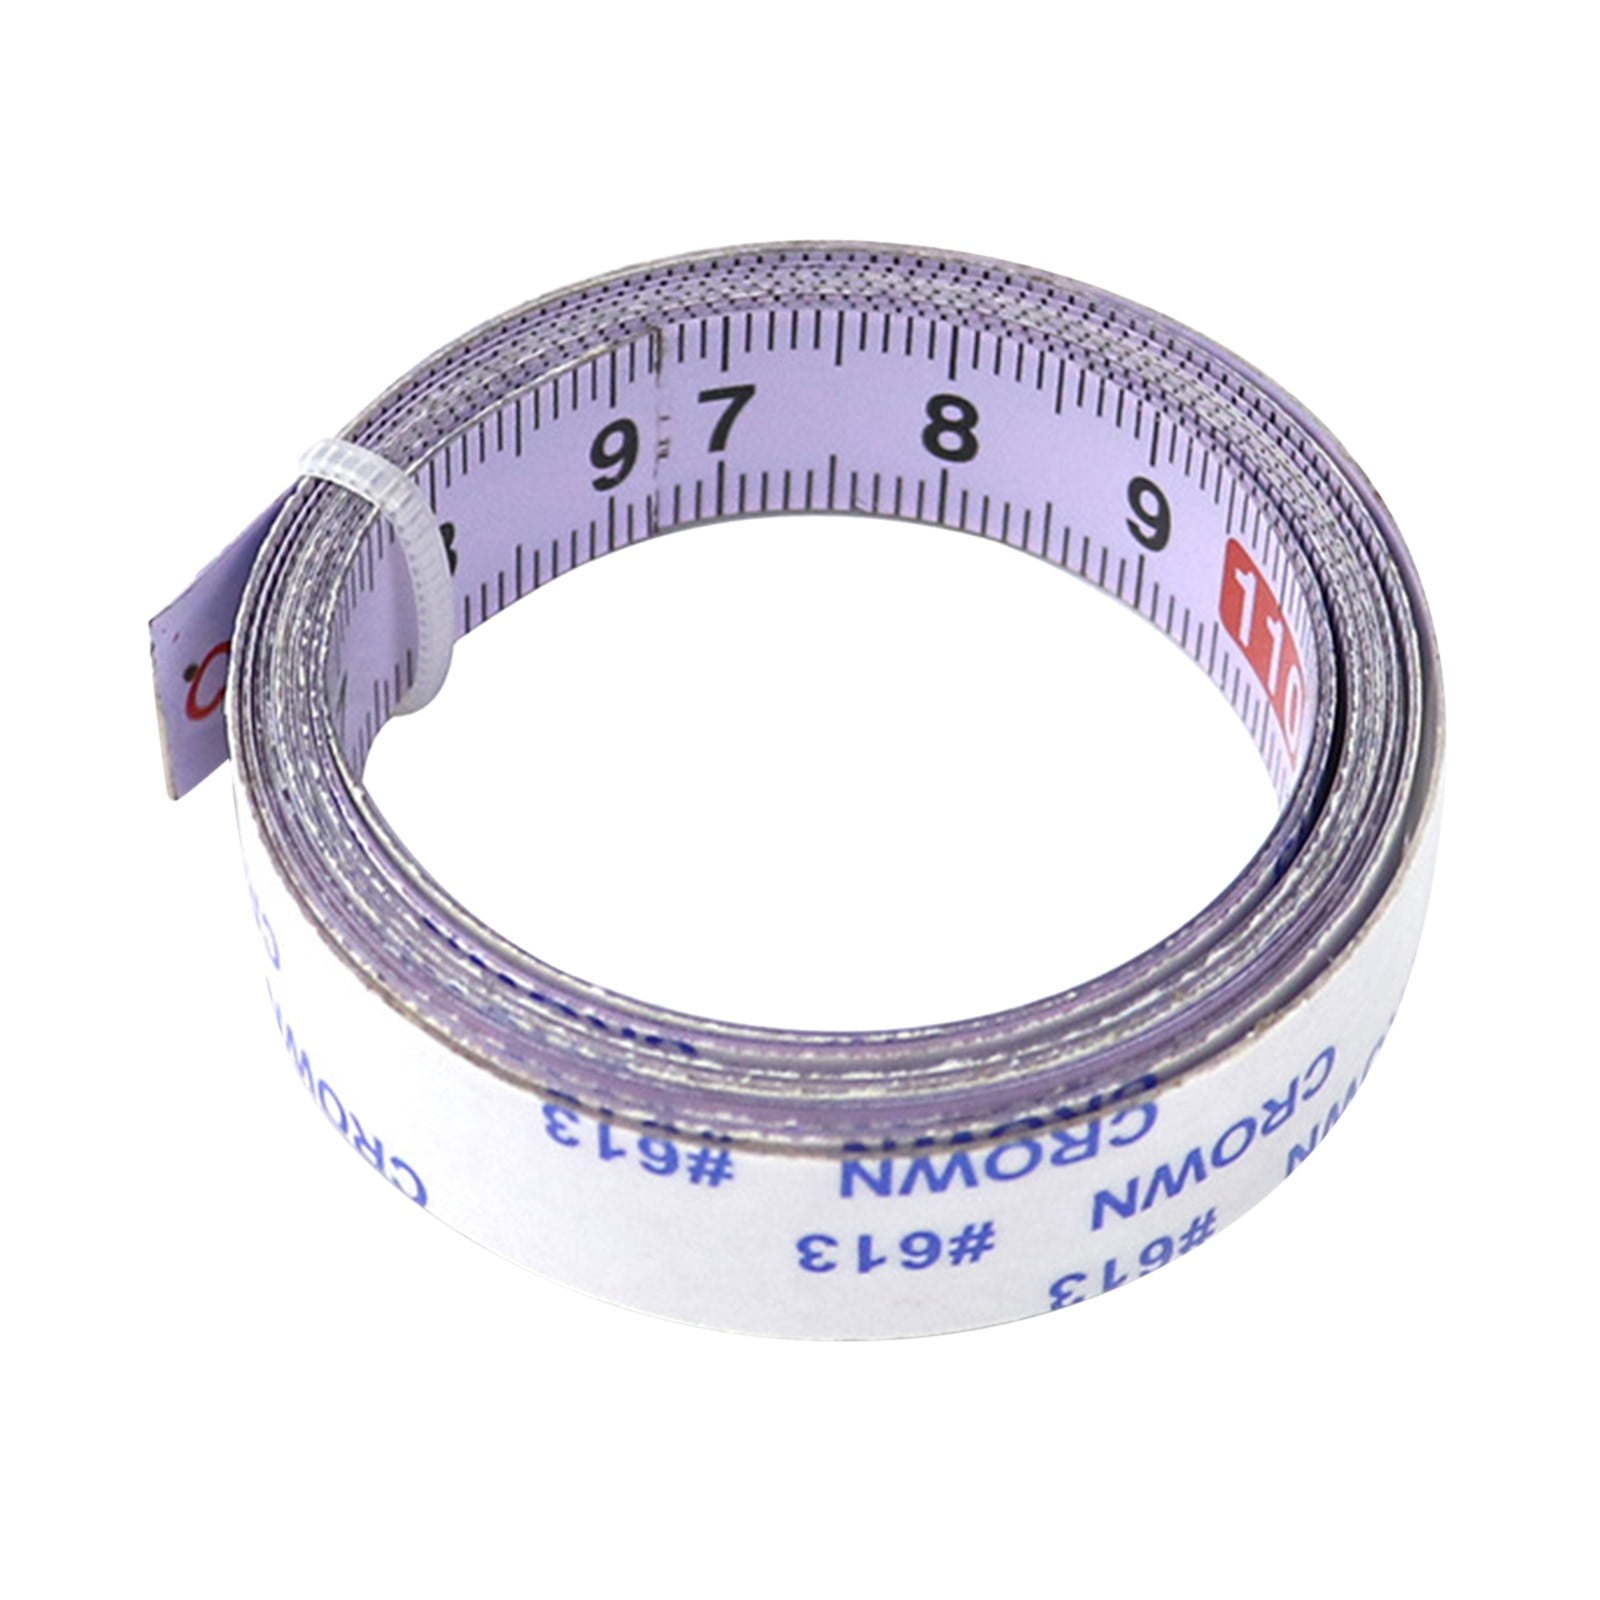 Frehsky Measuring Tape Stainless Steel Sticky Scale Woodworking Guide Rail Self Adhesive Tape Measure Flat Plate with Glue Metal Ruler Metric